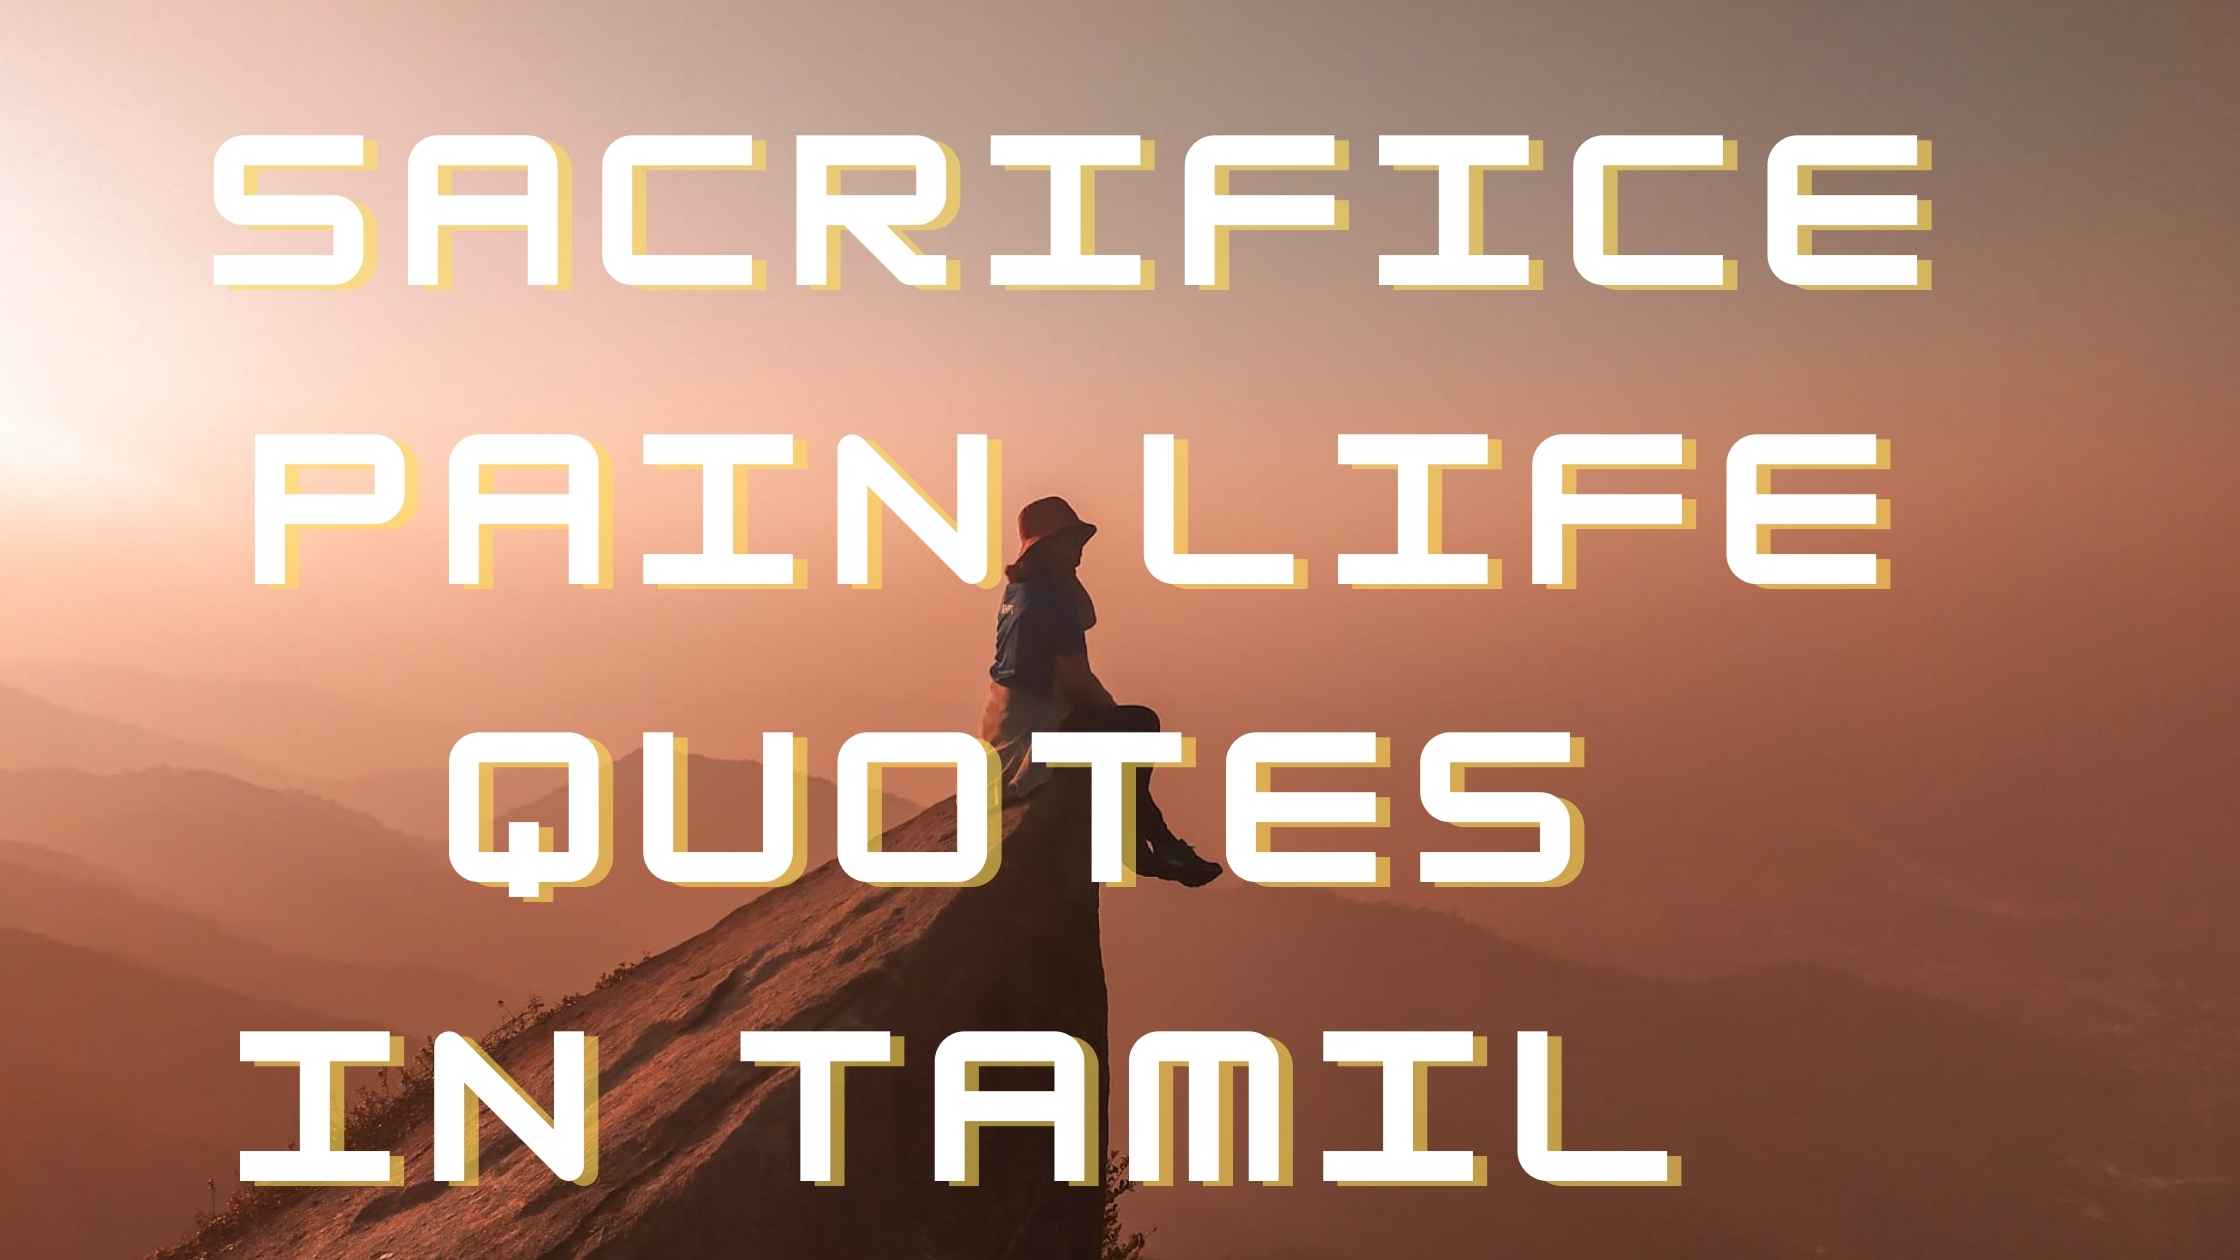 Sacrifice Pain Life Quotes in Tamil